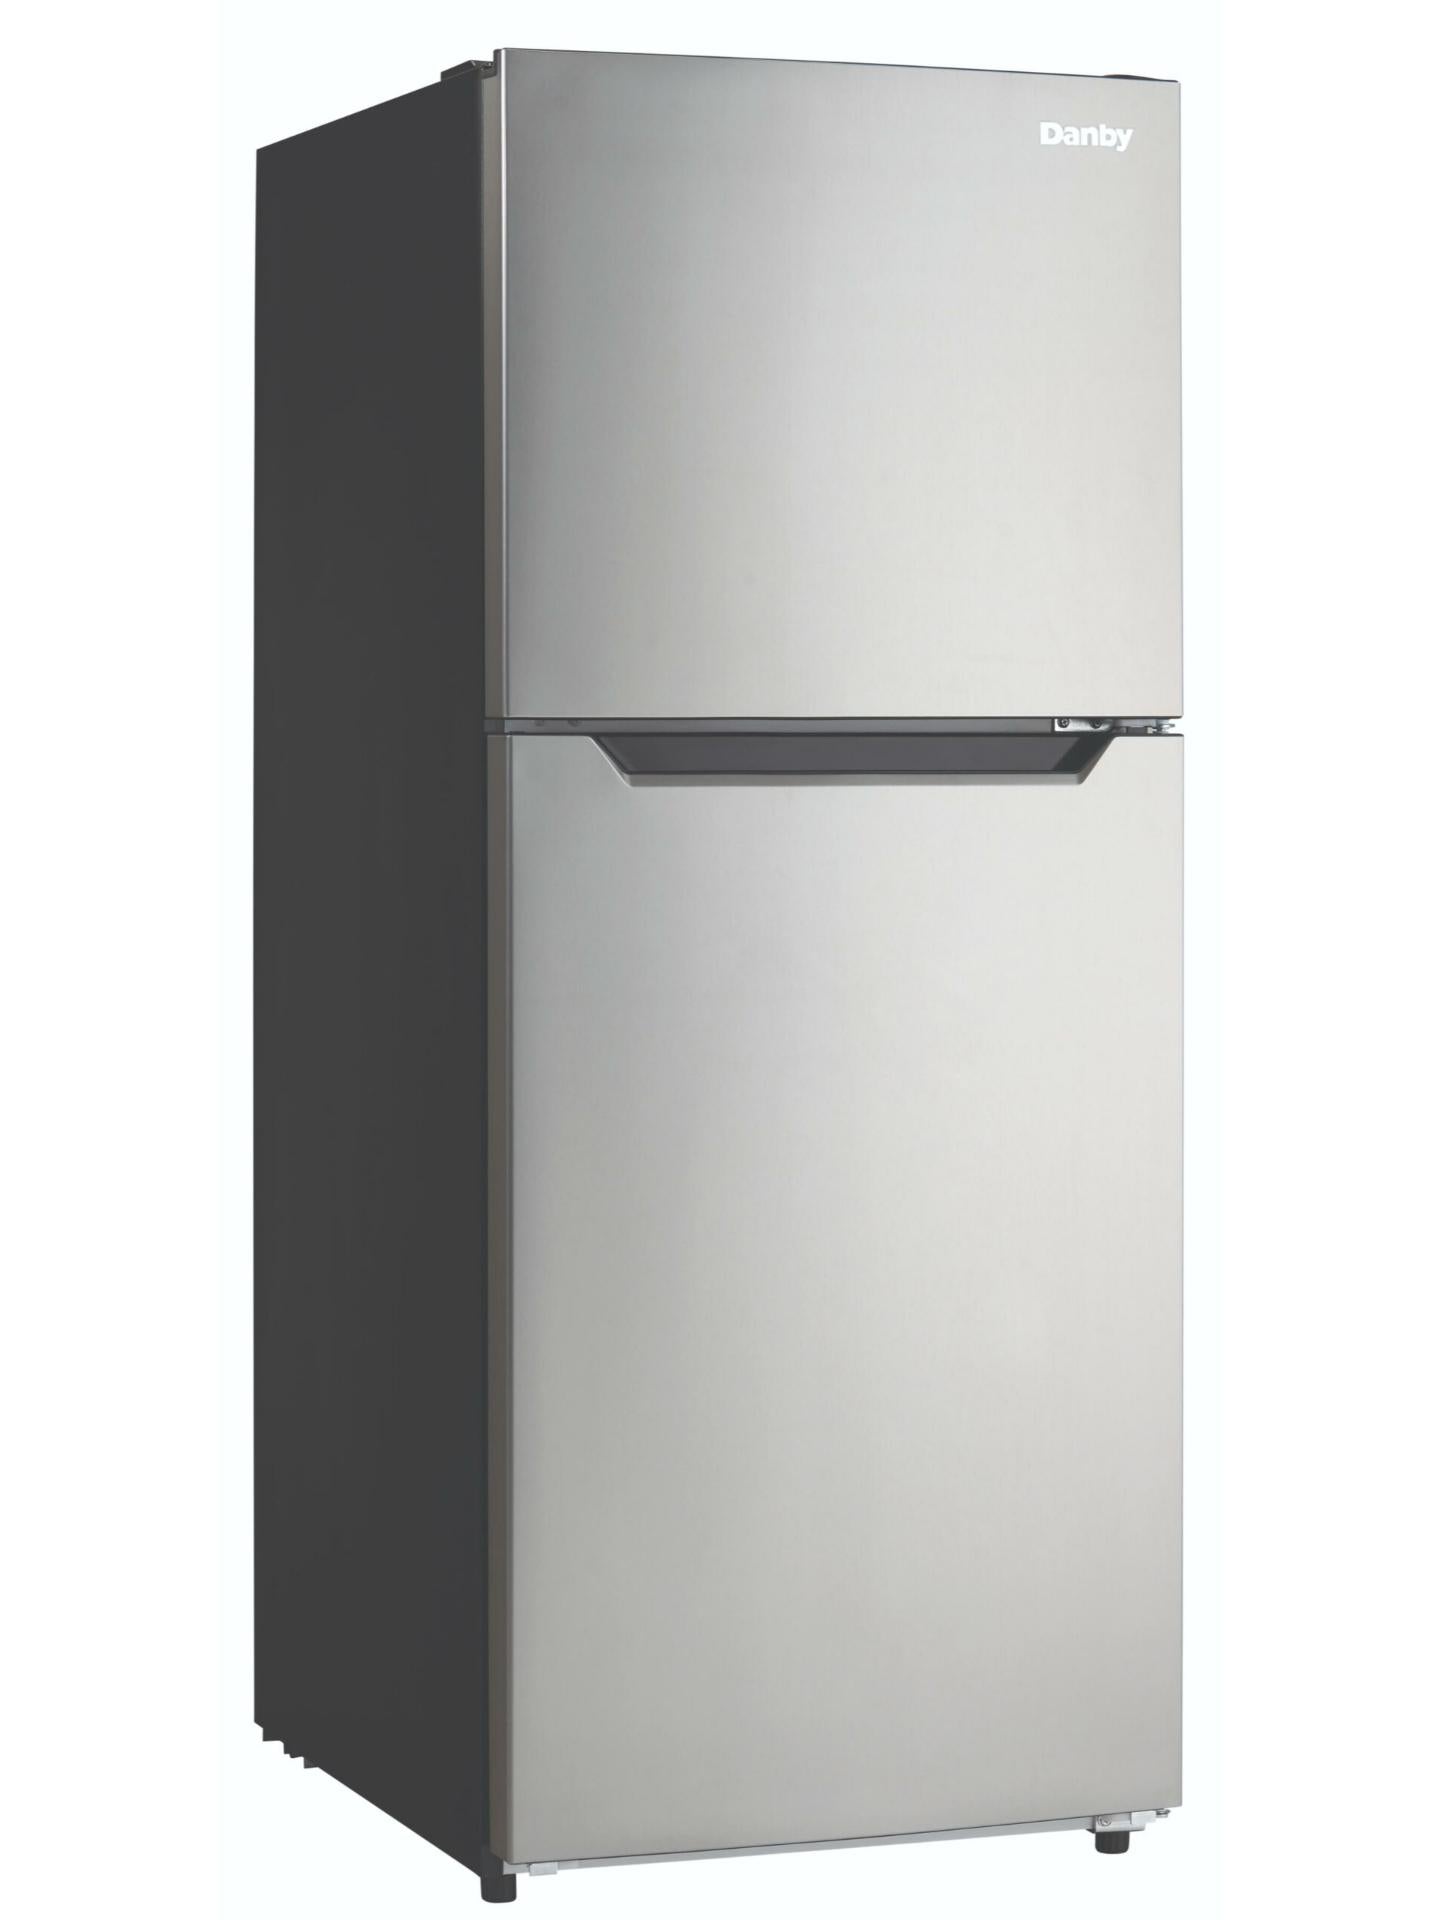 Danby 10.1 cu. ft. Top Mount Apartment Size Fridge in Stainless Steel